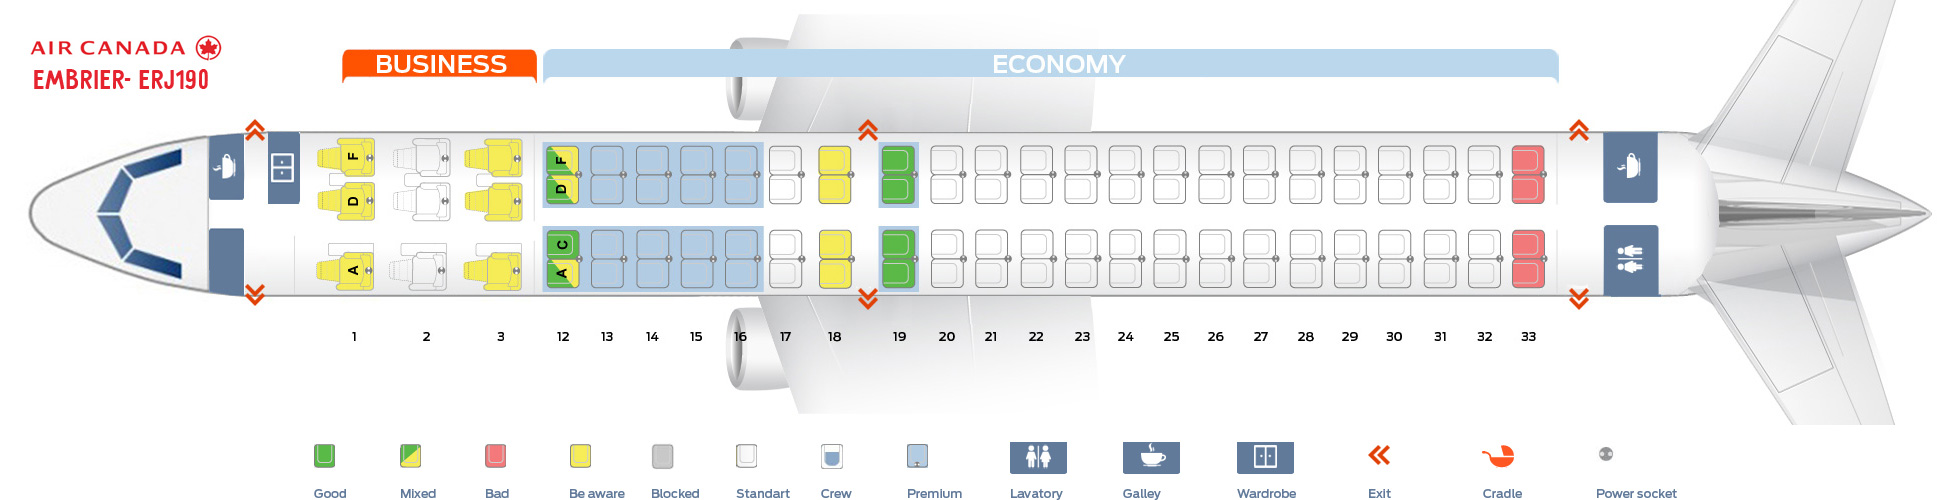 Seat Map Embraer Erj 190ar Air Canada Best Seats In Plane